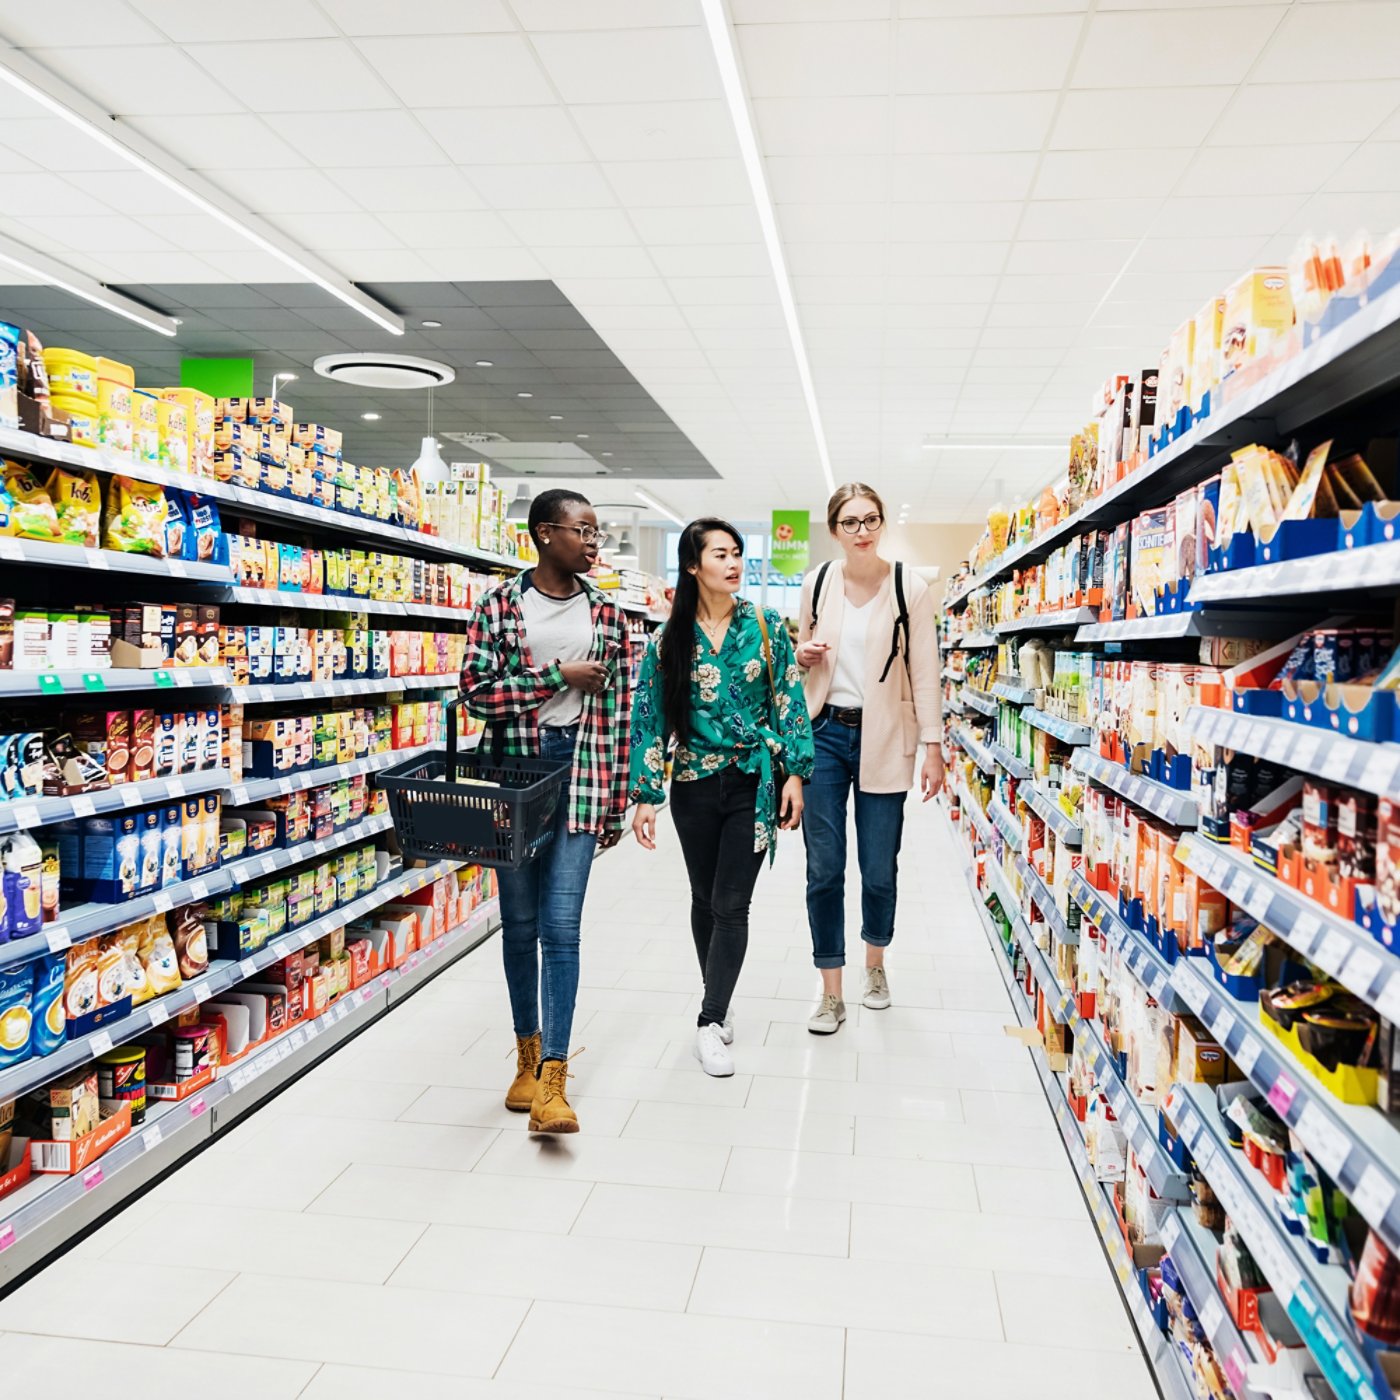 Three girls walking down an isle in the supermarket while out together shopping for food.